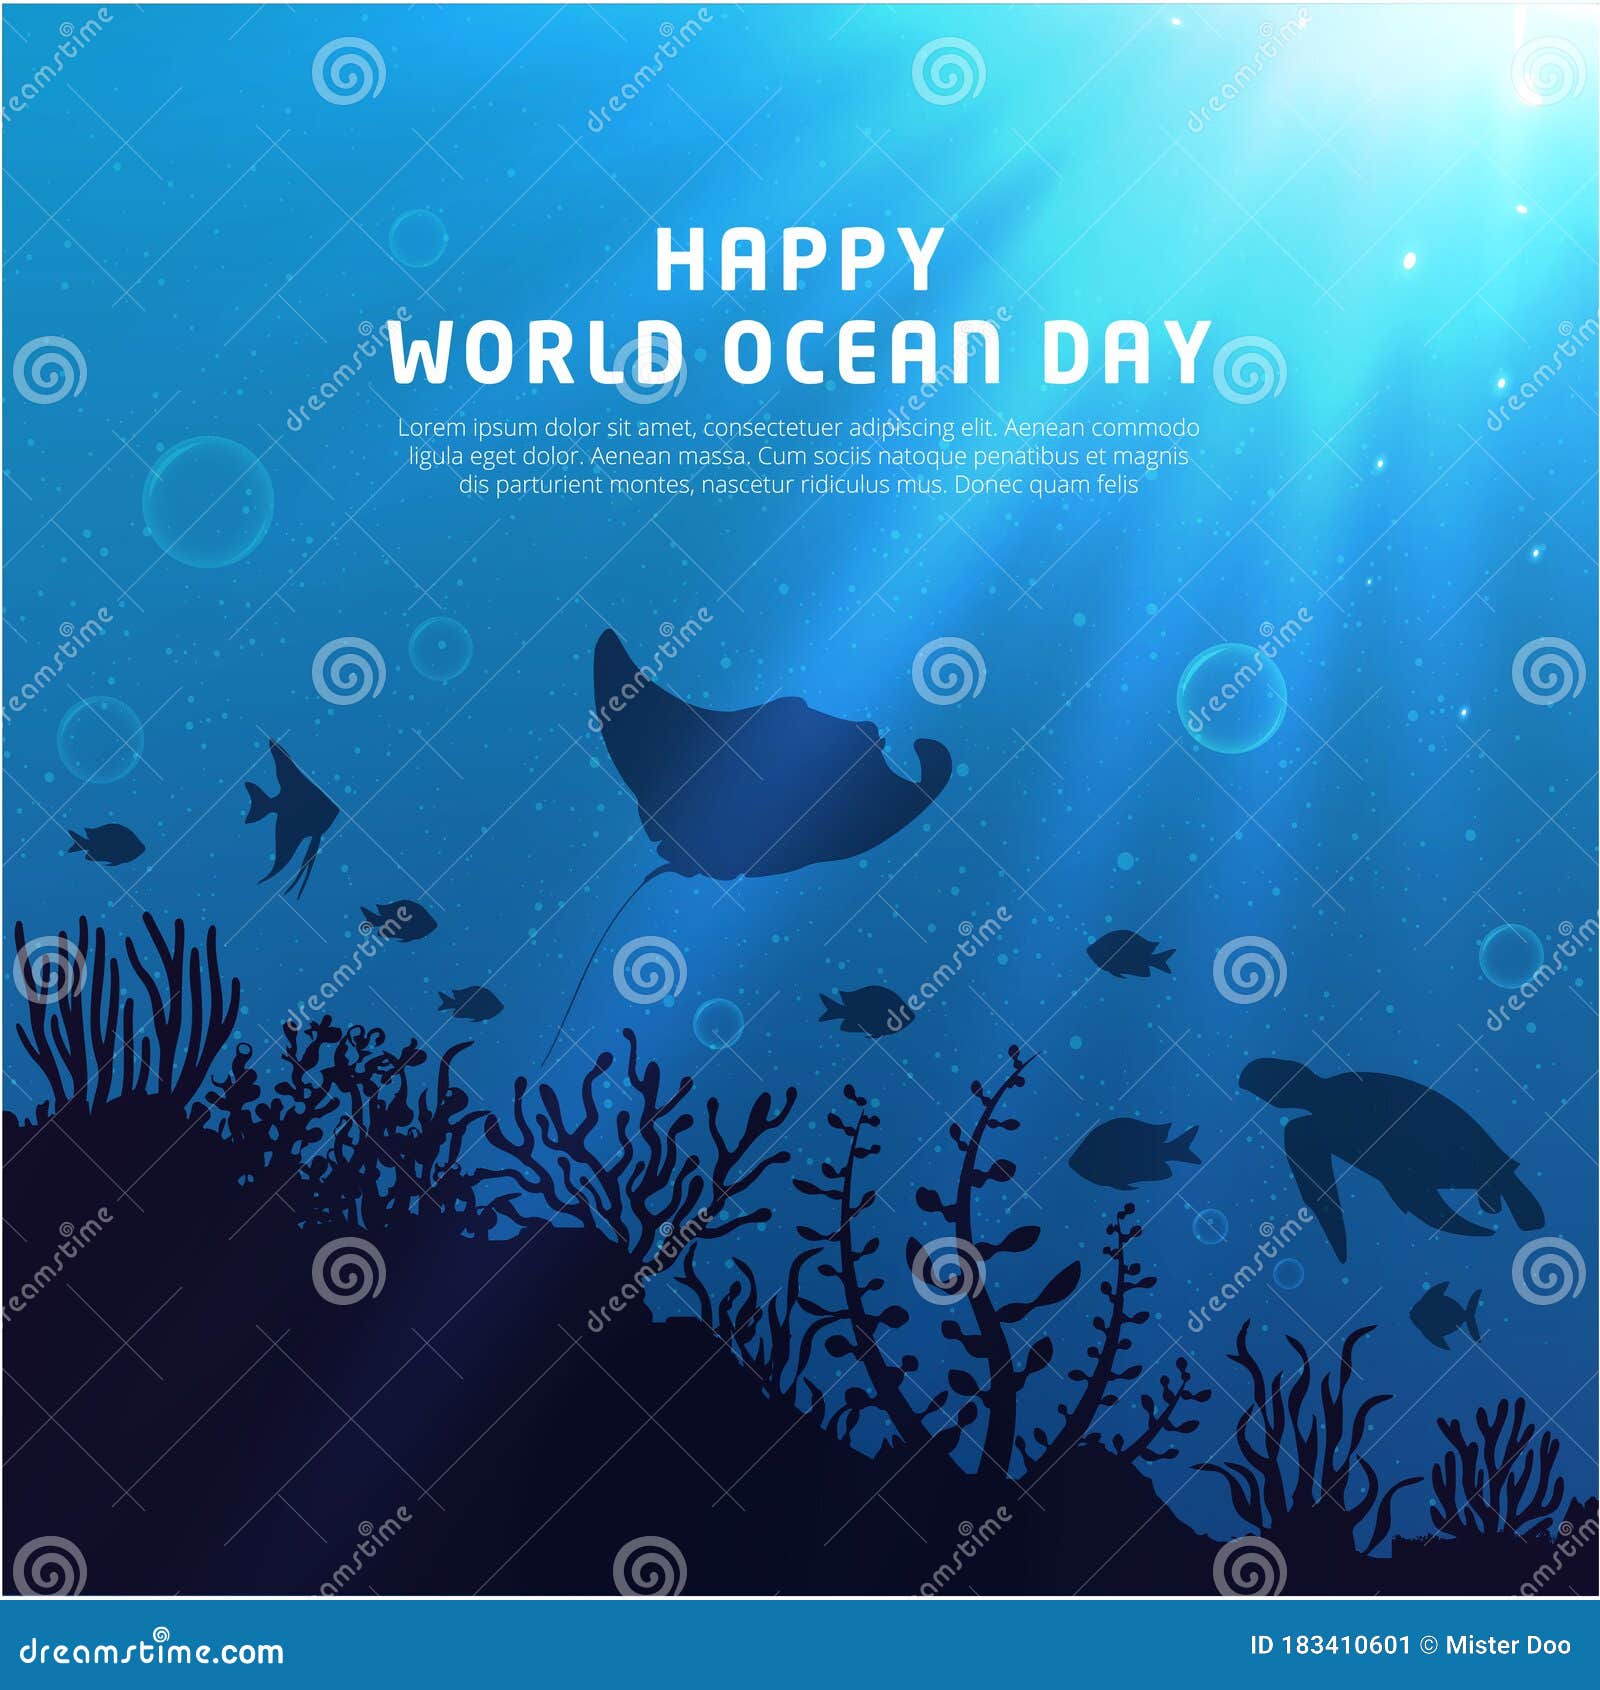 Happy World Oceans Day Background With Underwater Ocean Shinny Light Coral Sea Plants Stingray And Turtle Stock Vector Illustration Of Earth Bright